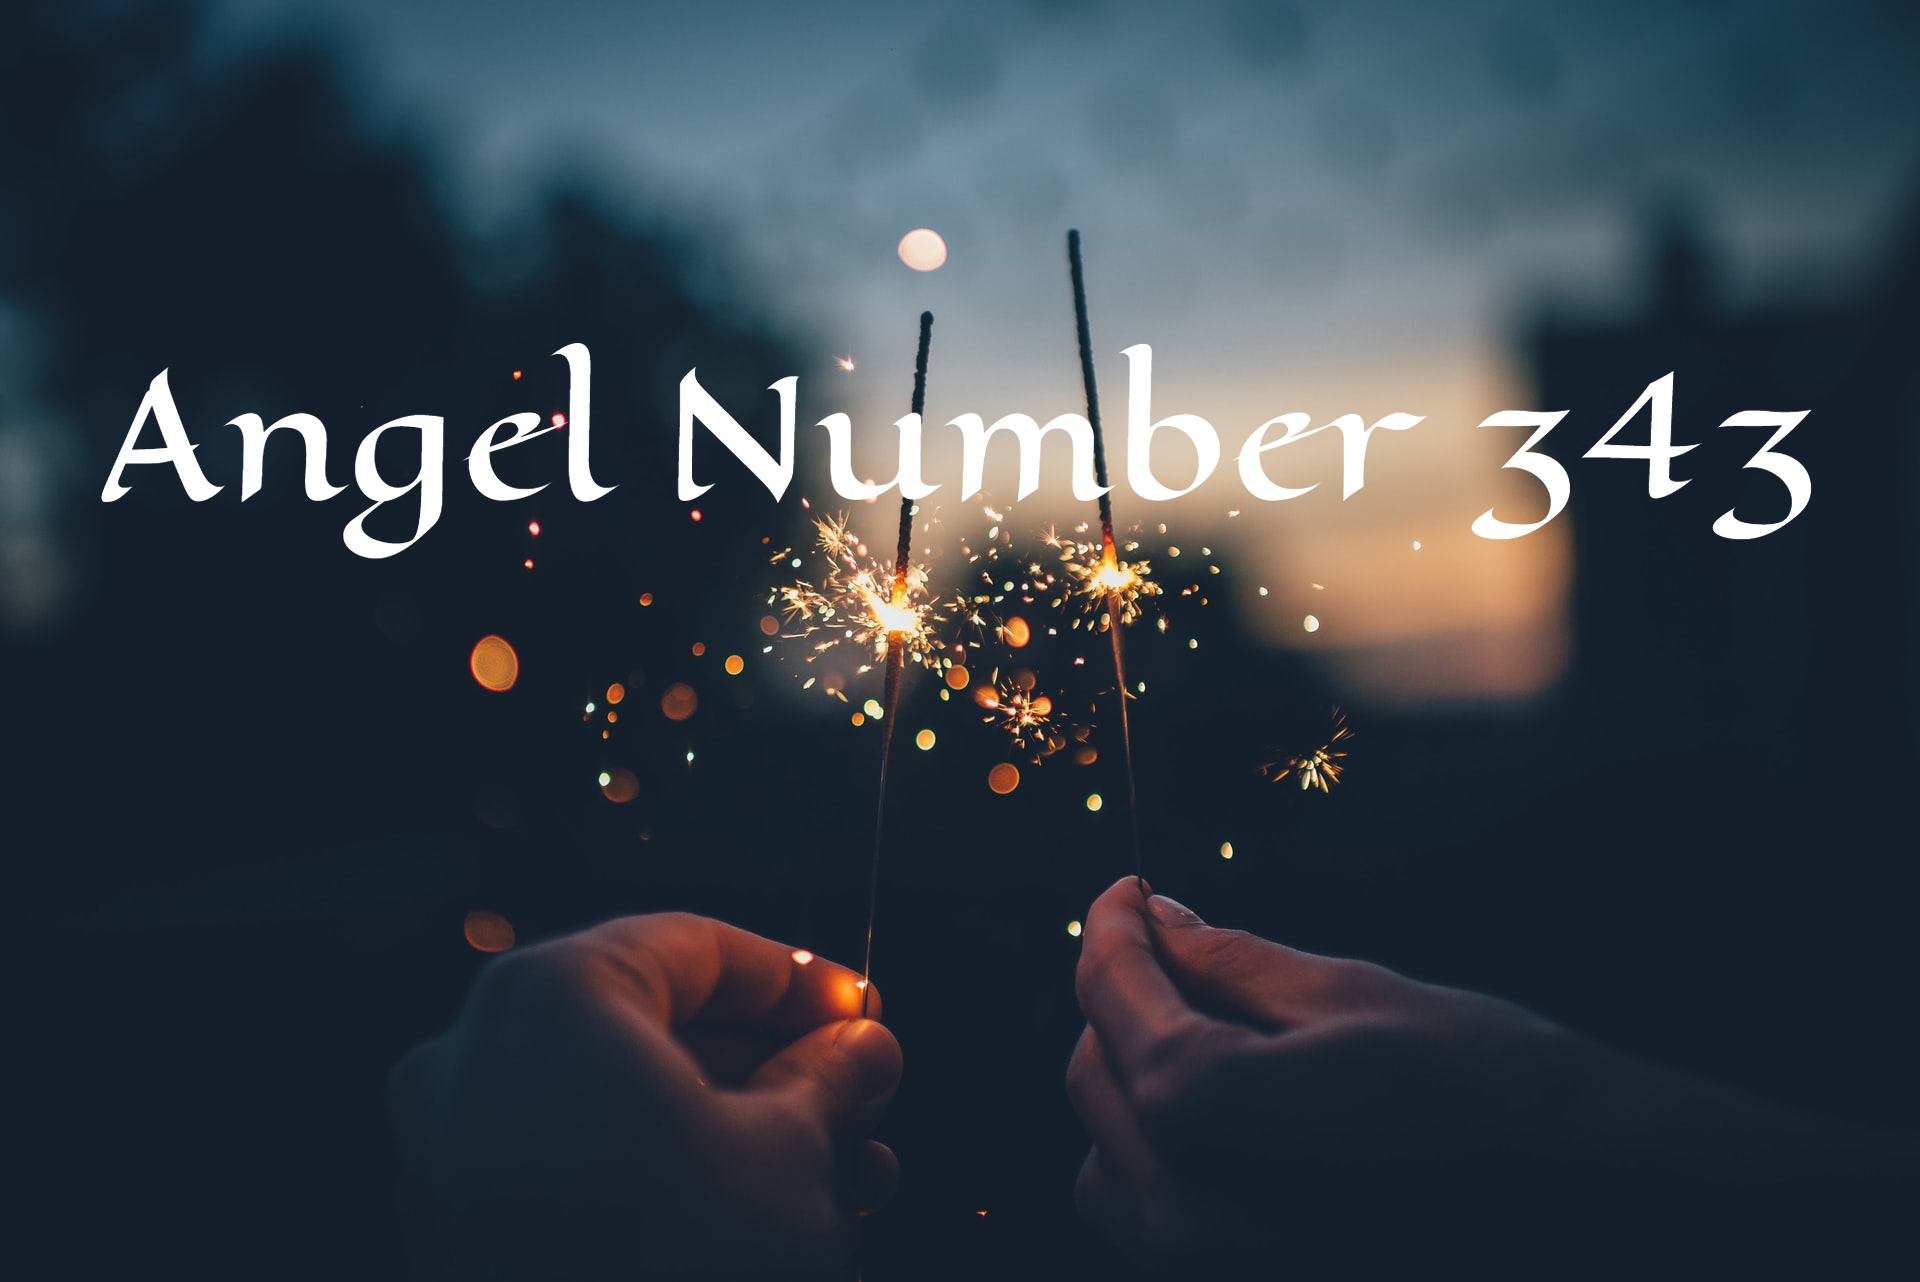 Angel Number 343 - A Reminder From The Spiritual Realm